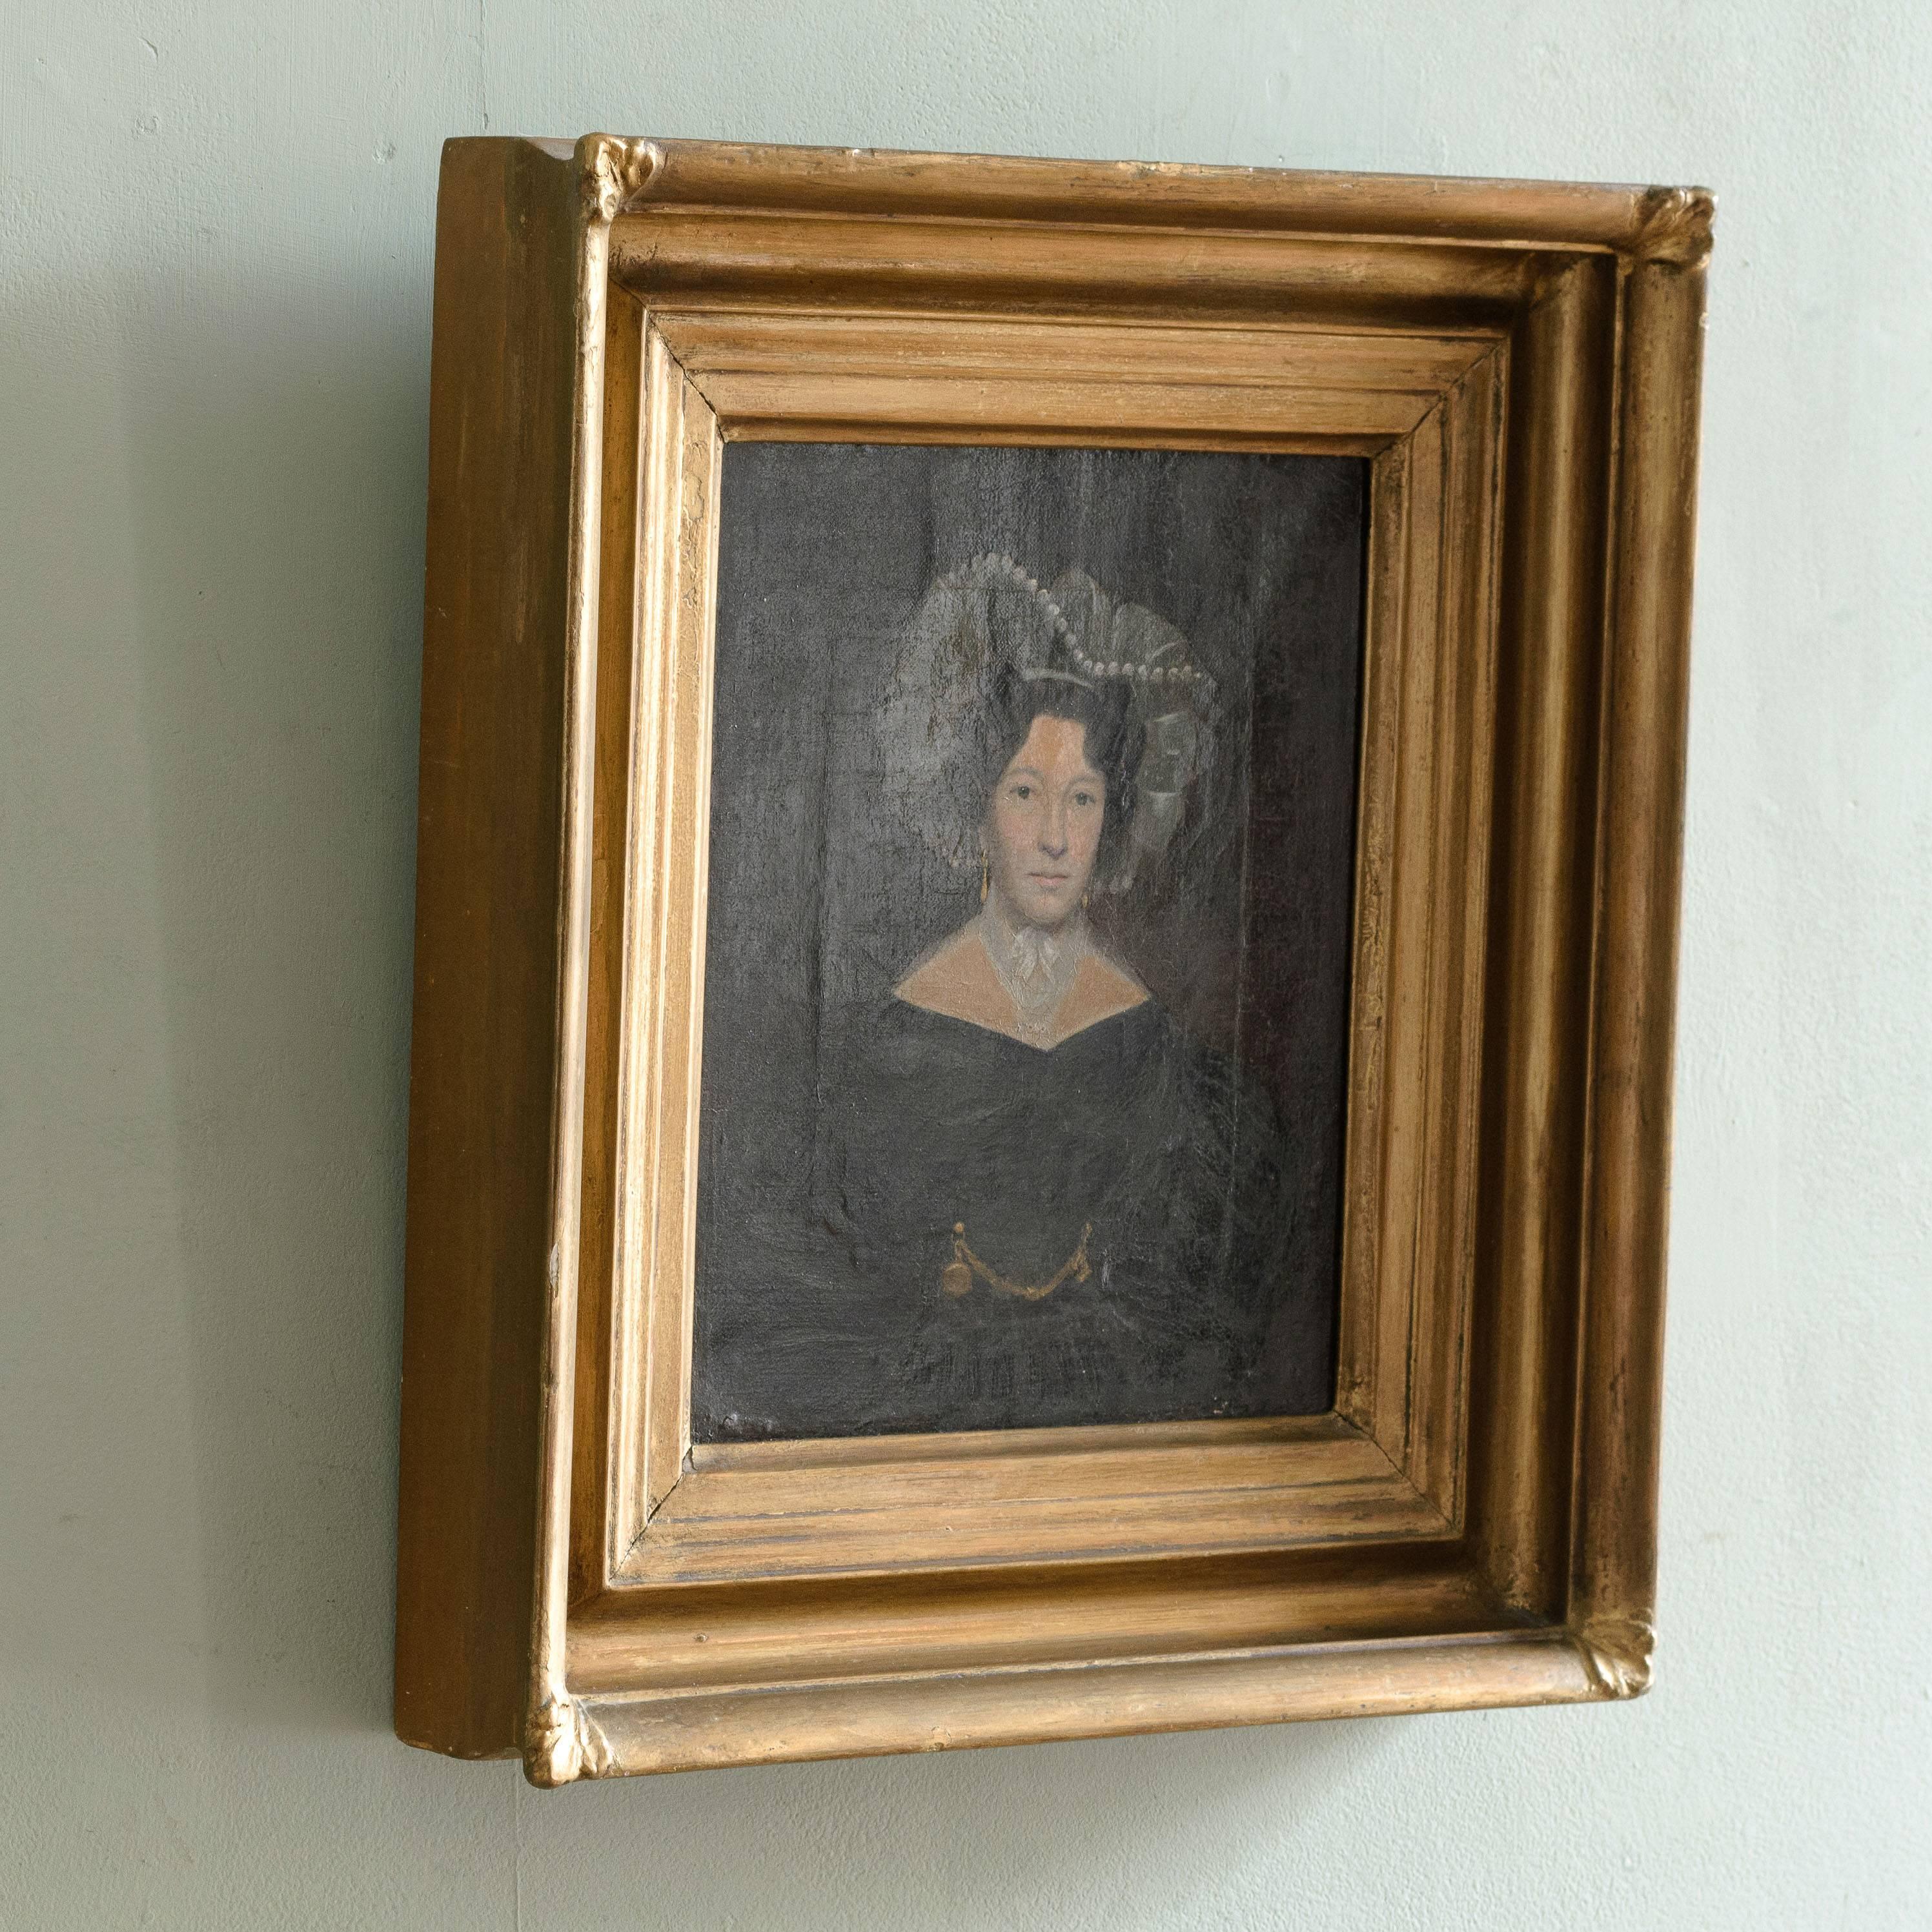 19th century portrait of Mrs Taylor, oil on canvas in period gilt frame by Rowley of Kensington. Mrs Taylor was wife of Major Taylor and aunt of Elizabeth Bray.